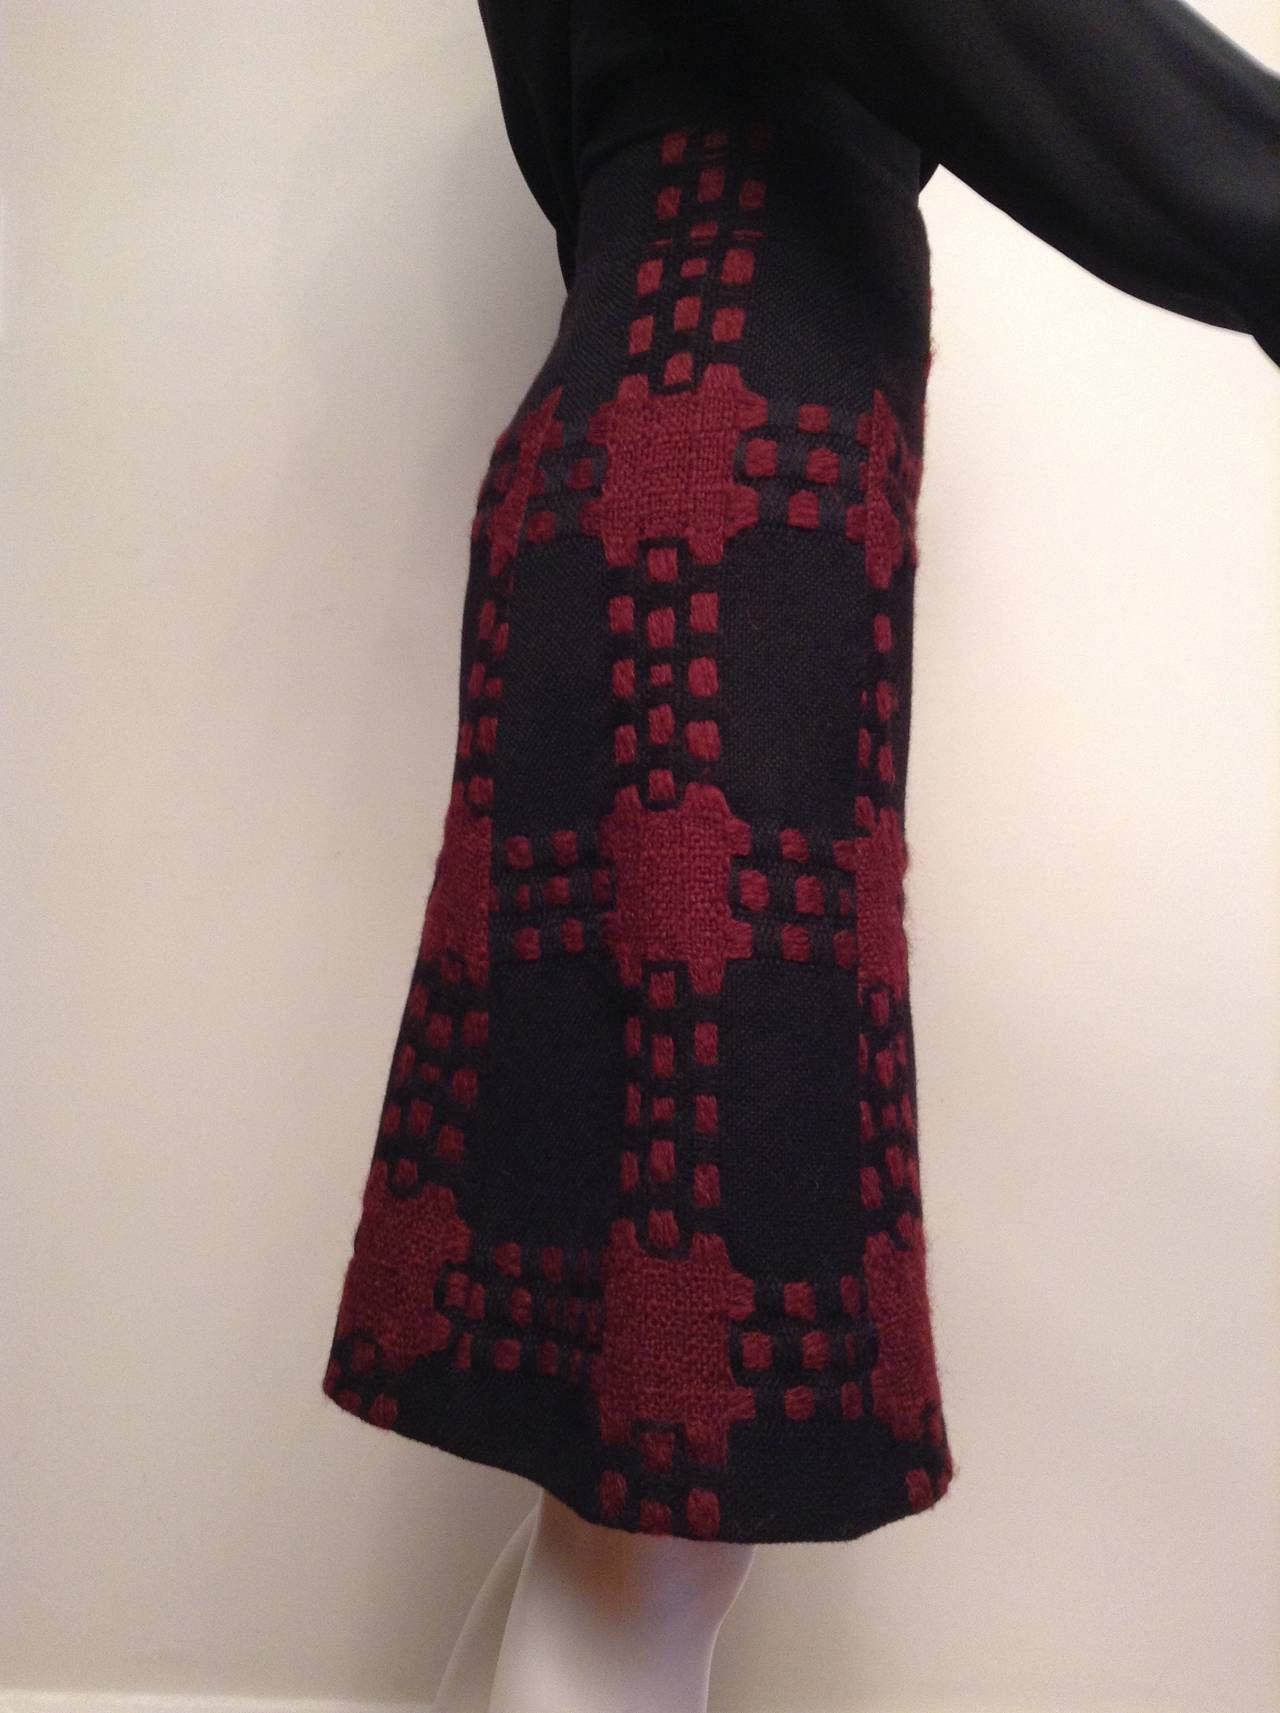 Gucci AW07 Wool A Line Black and Maroon Skirt Size 40/6 In Excellent Condition For Sale In Toronto, Ontario